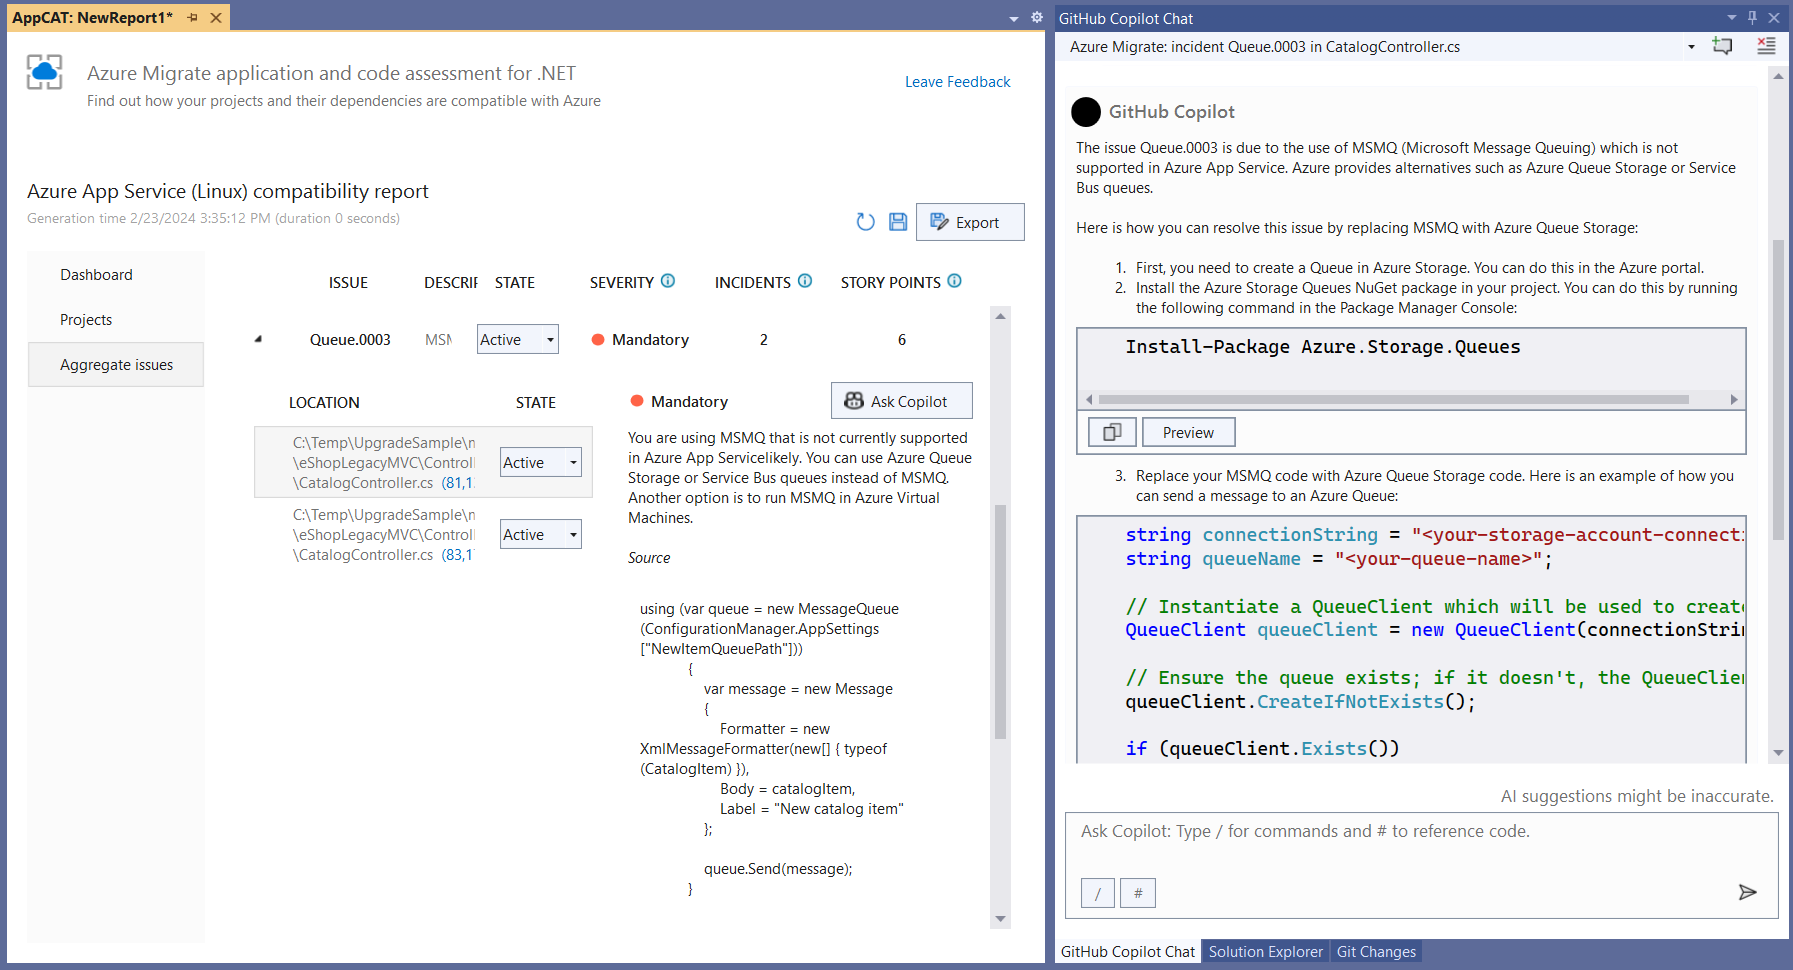 Screenshot of the Azure Migrate application and code assessment's UI for asking GitHub Copilot Chat about an issue